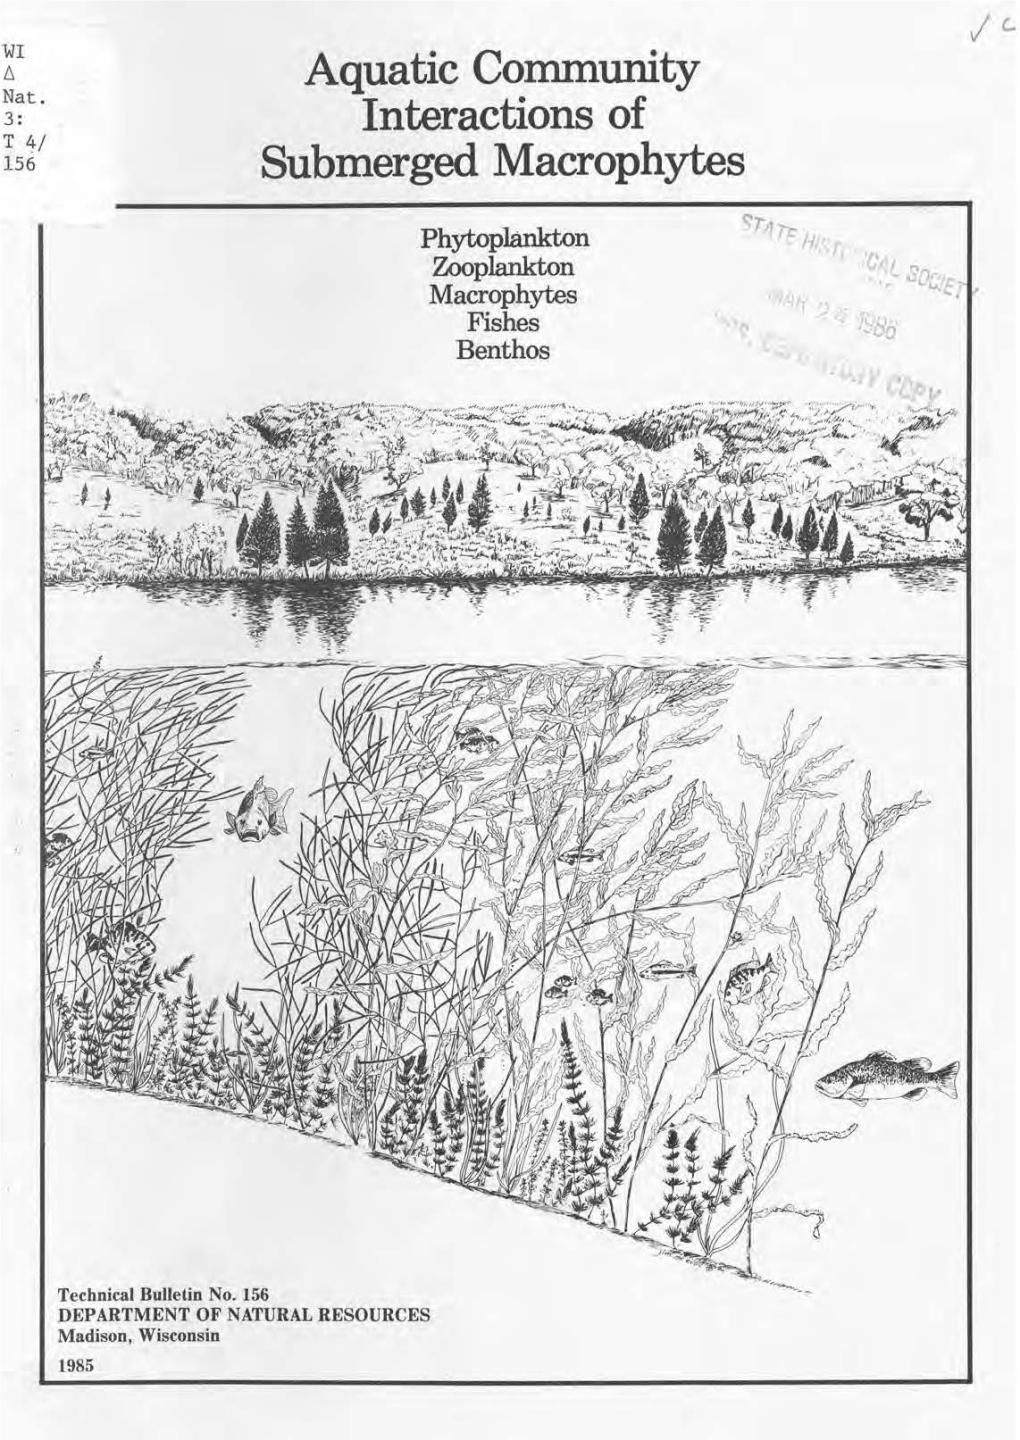 AQUATIC COMMUNITY INTERACTIONS of SUBMERGED MACROPHYTES I by Sandy Engel